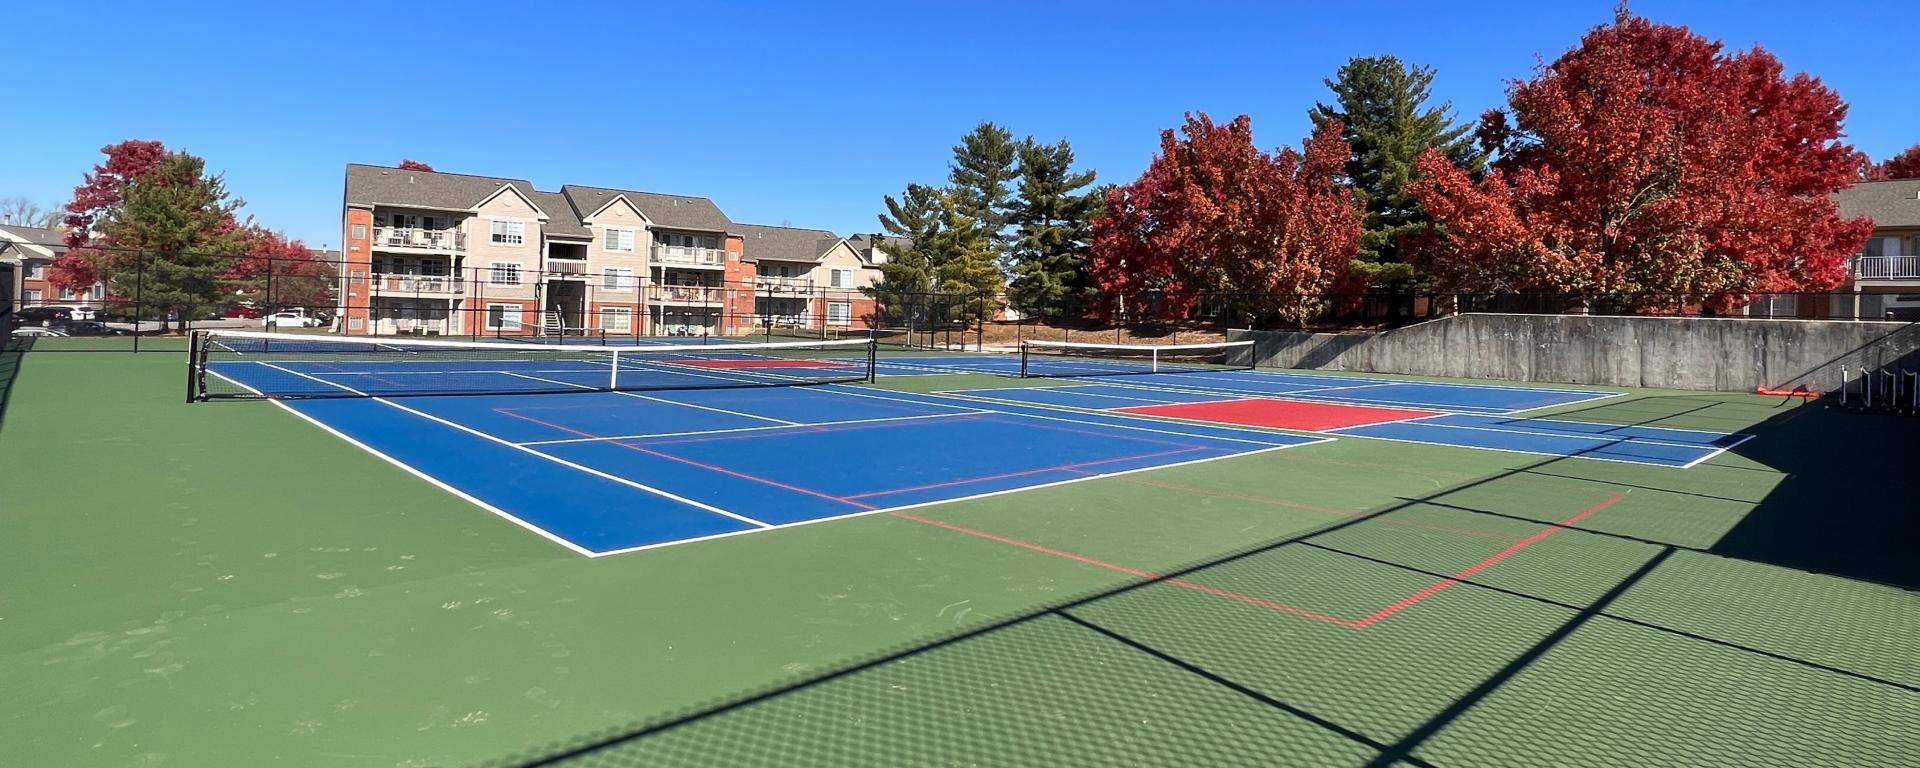 new blue tennis courts with trees